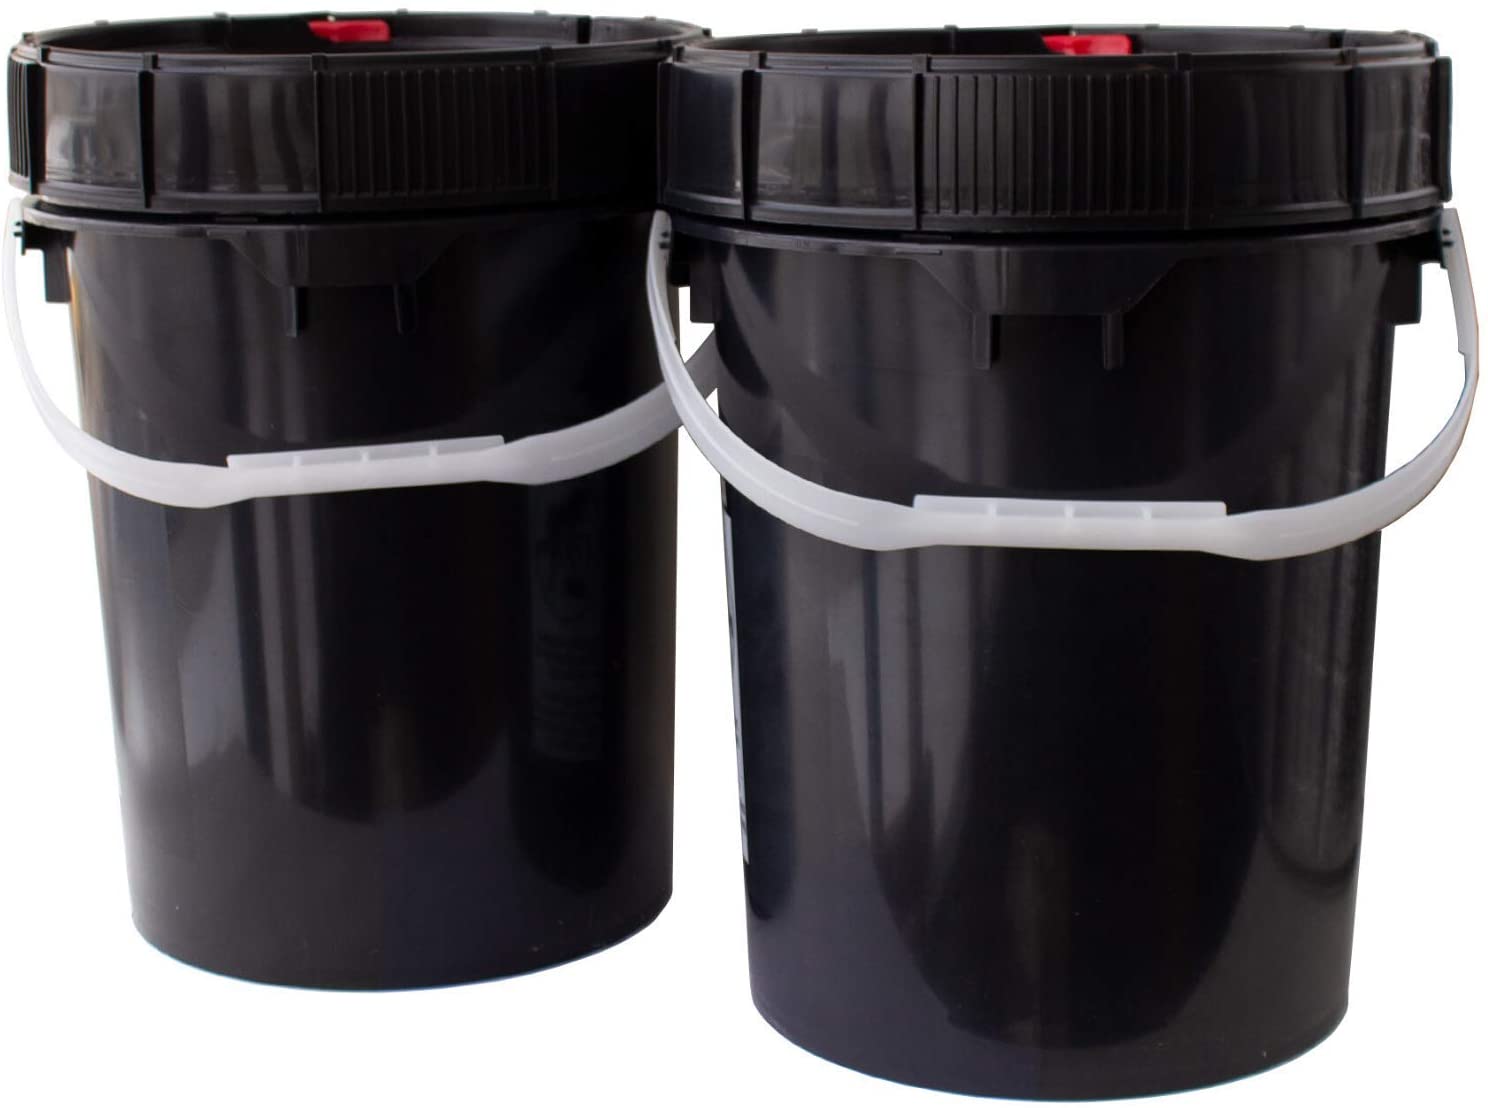 5 Gallon Bucket with Lid